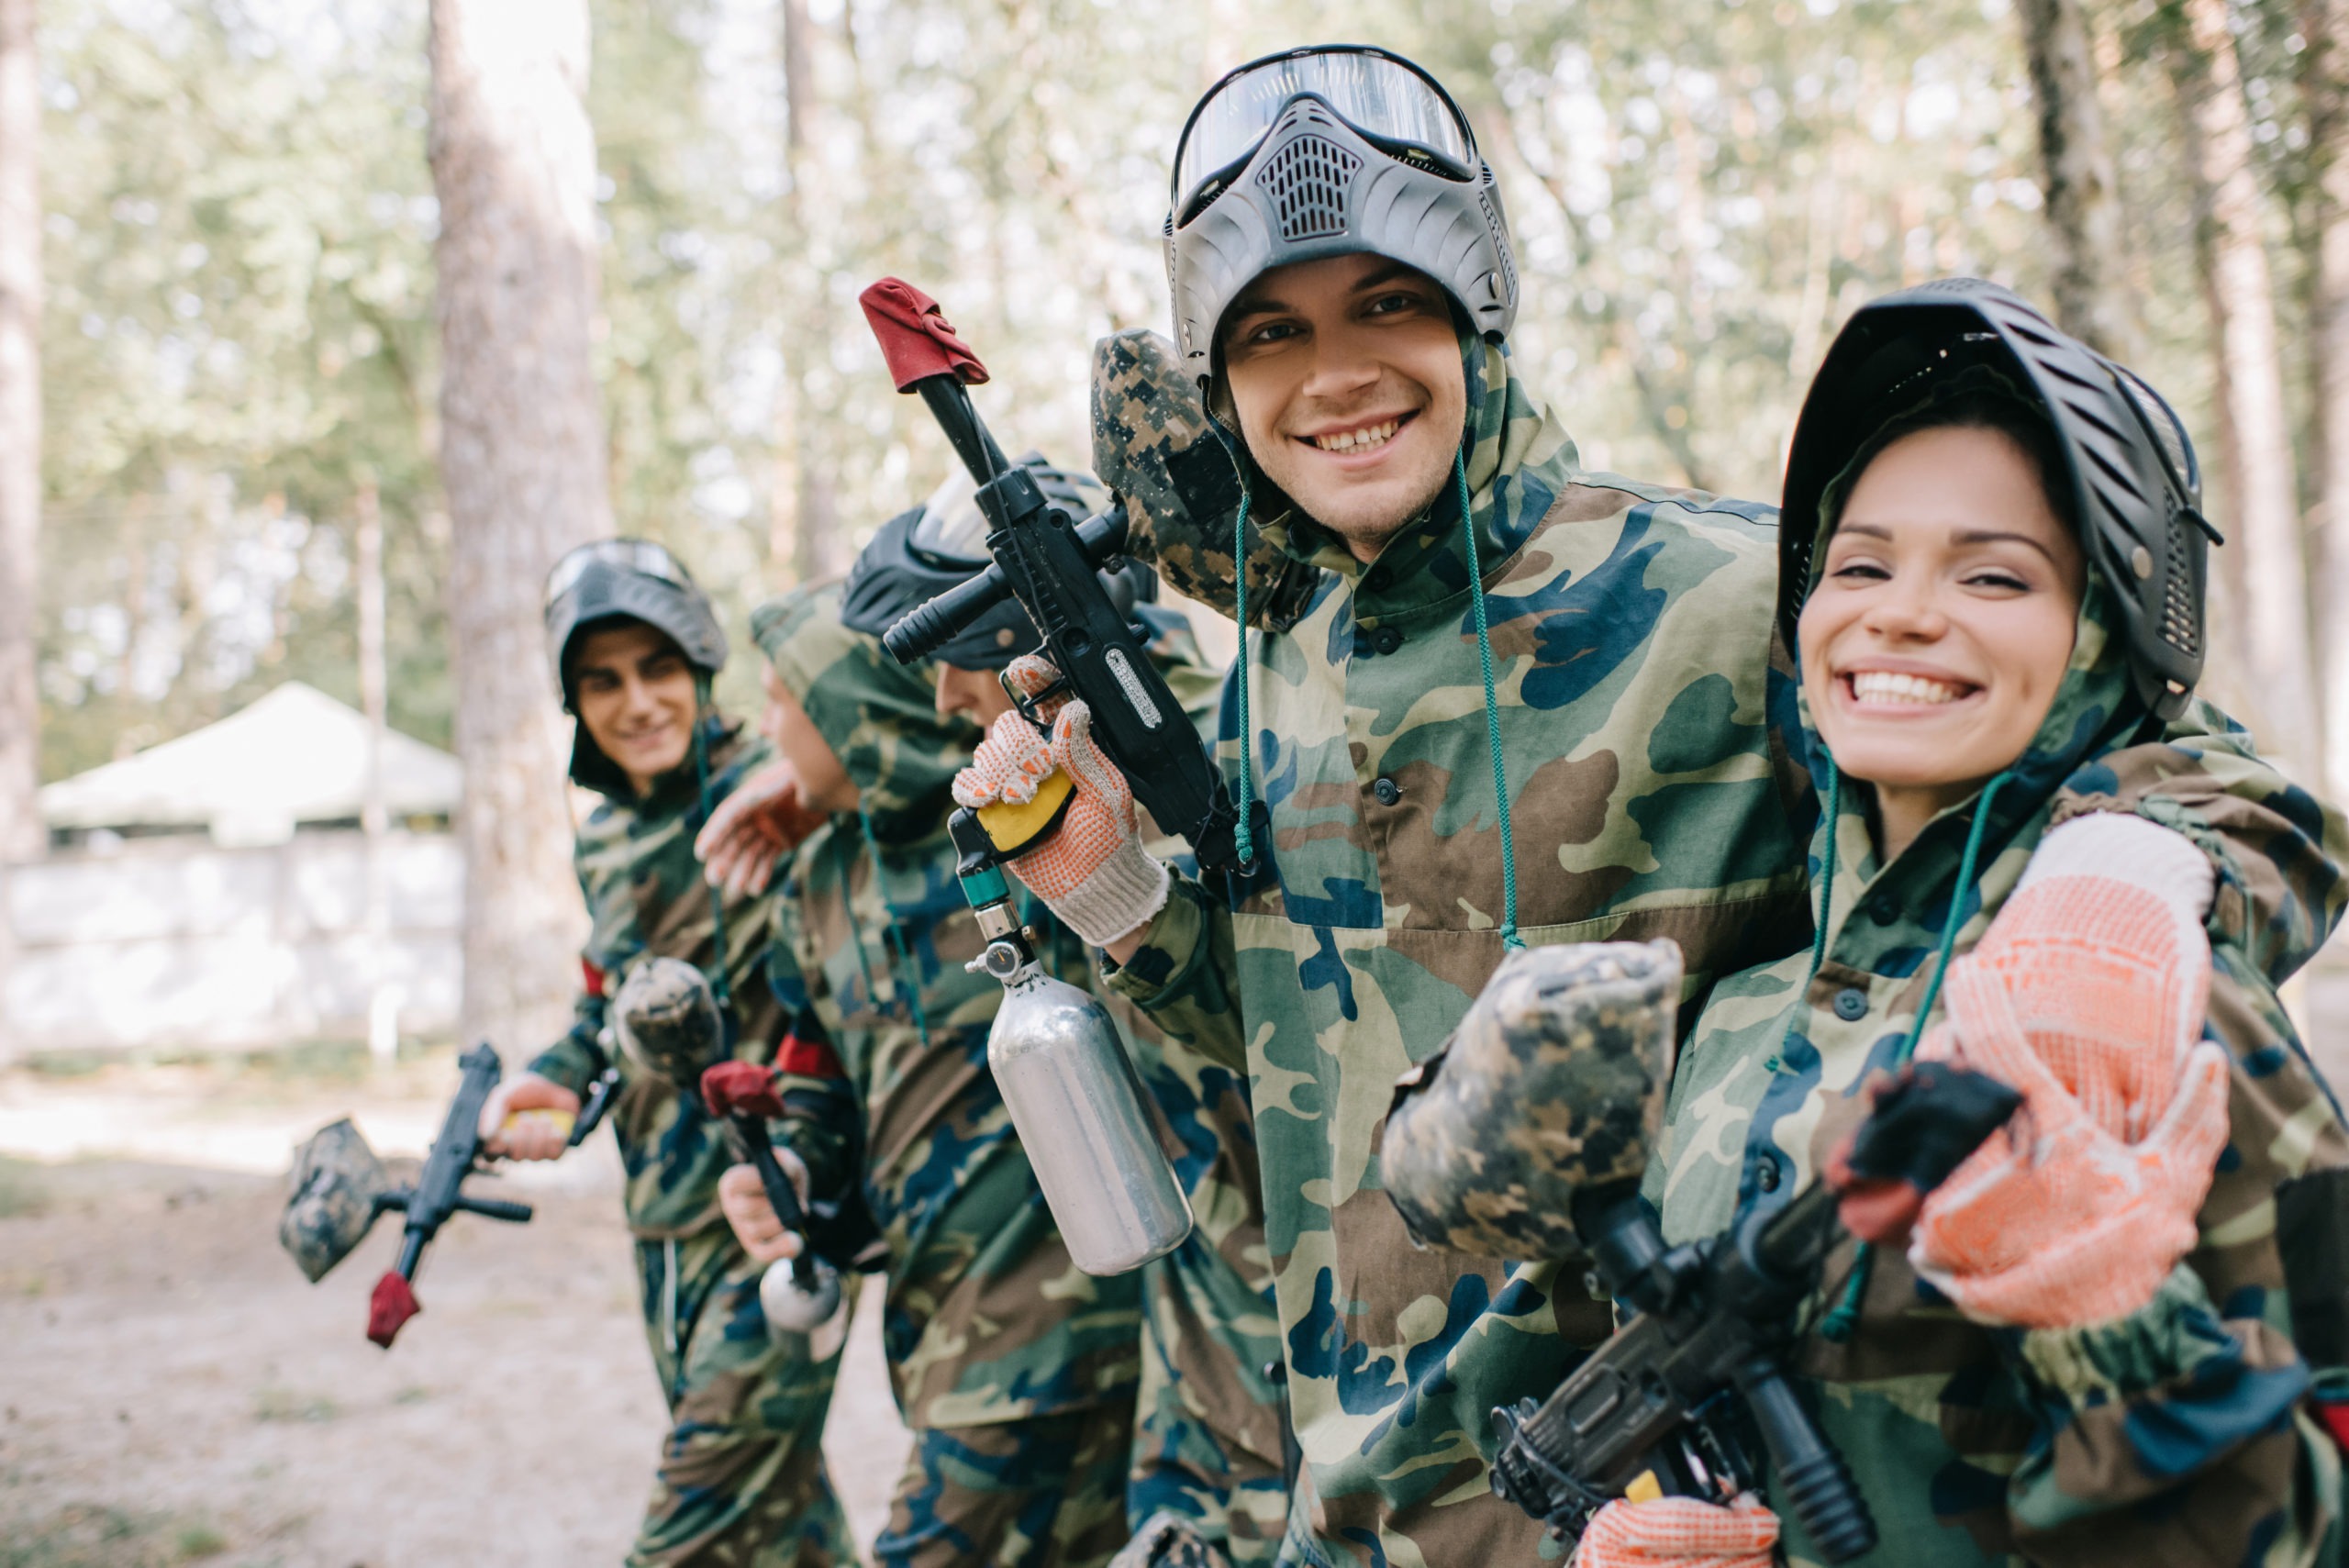 smiling young male paintballer embracing female teammate in camouflage with paintball gun outdoors